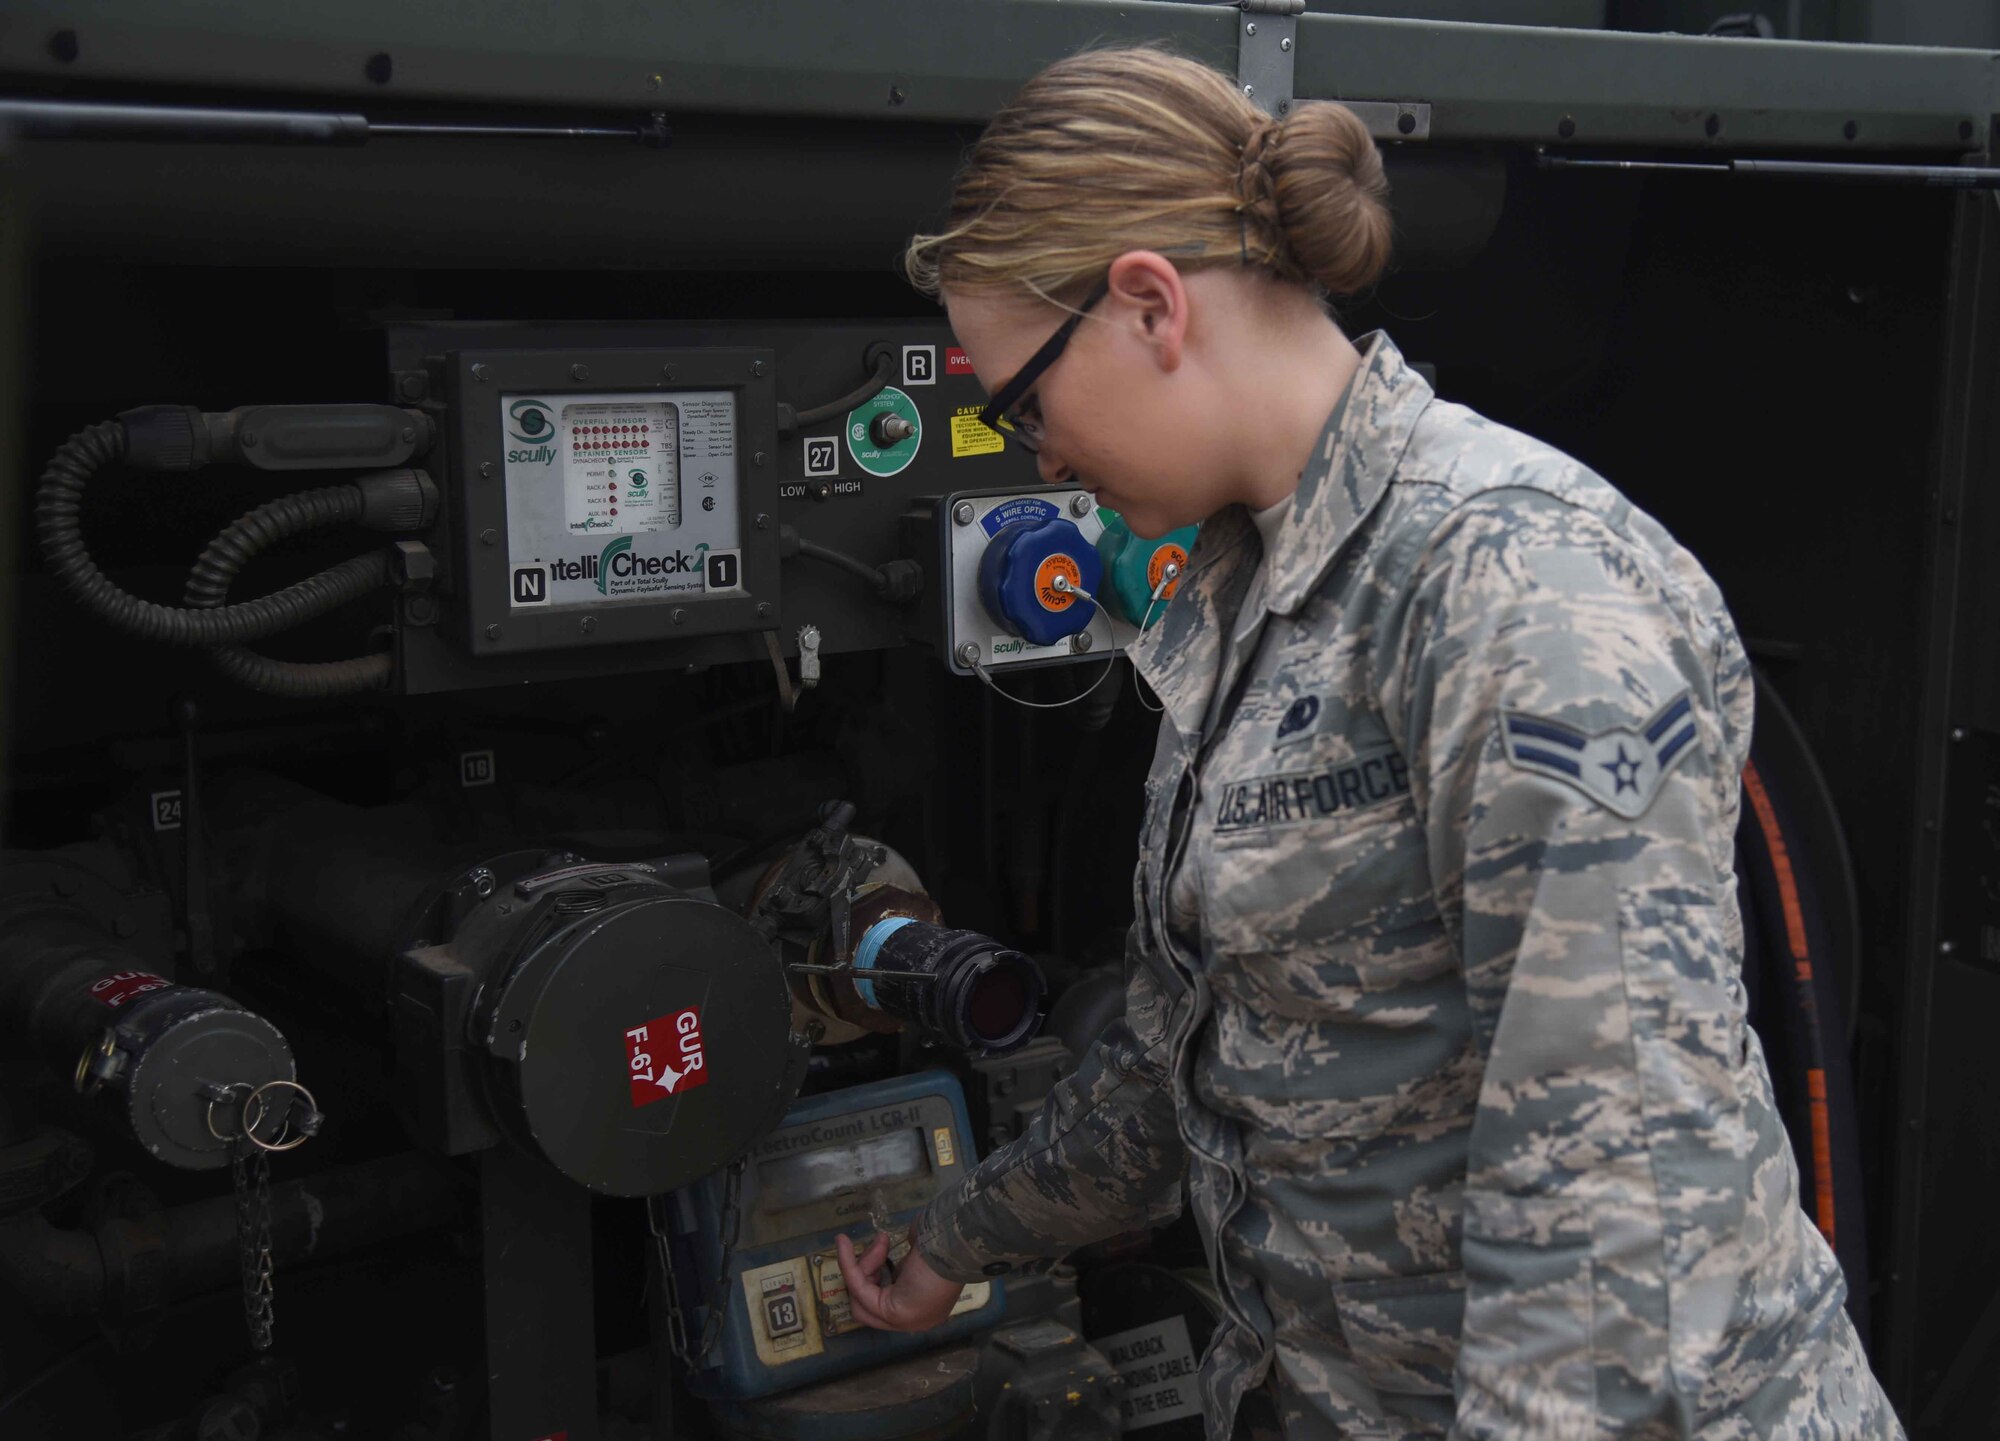 Airman 1st Class Kaitlin Reynolds, 22nd Logistics Readiness Squadron Fuels Distributions technician, checks gauges on a fuels truck May 11, 2017, at McConnell Air Force Base, Kan. The fuels flight is responsible for receiving, issuing, maintaining, storing and testing all aviation and ground-product fuels that come into the base for every aircraft and vehicle. (U.S. Air Force photo/Airman 1st Class Erin McClellan)